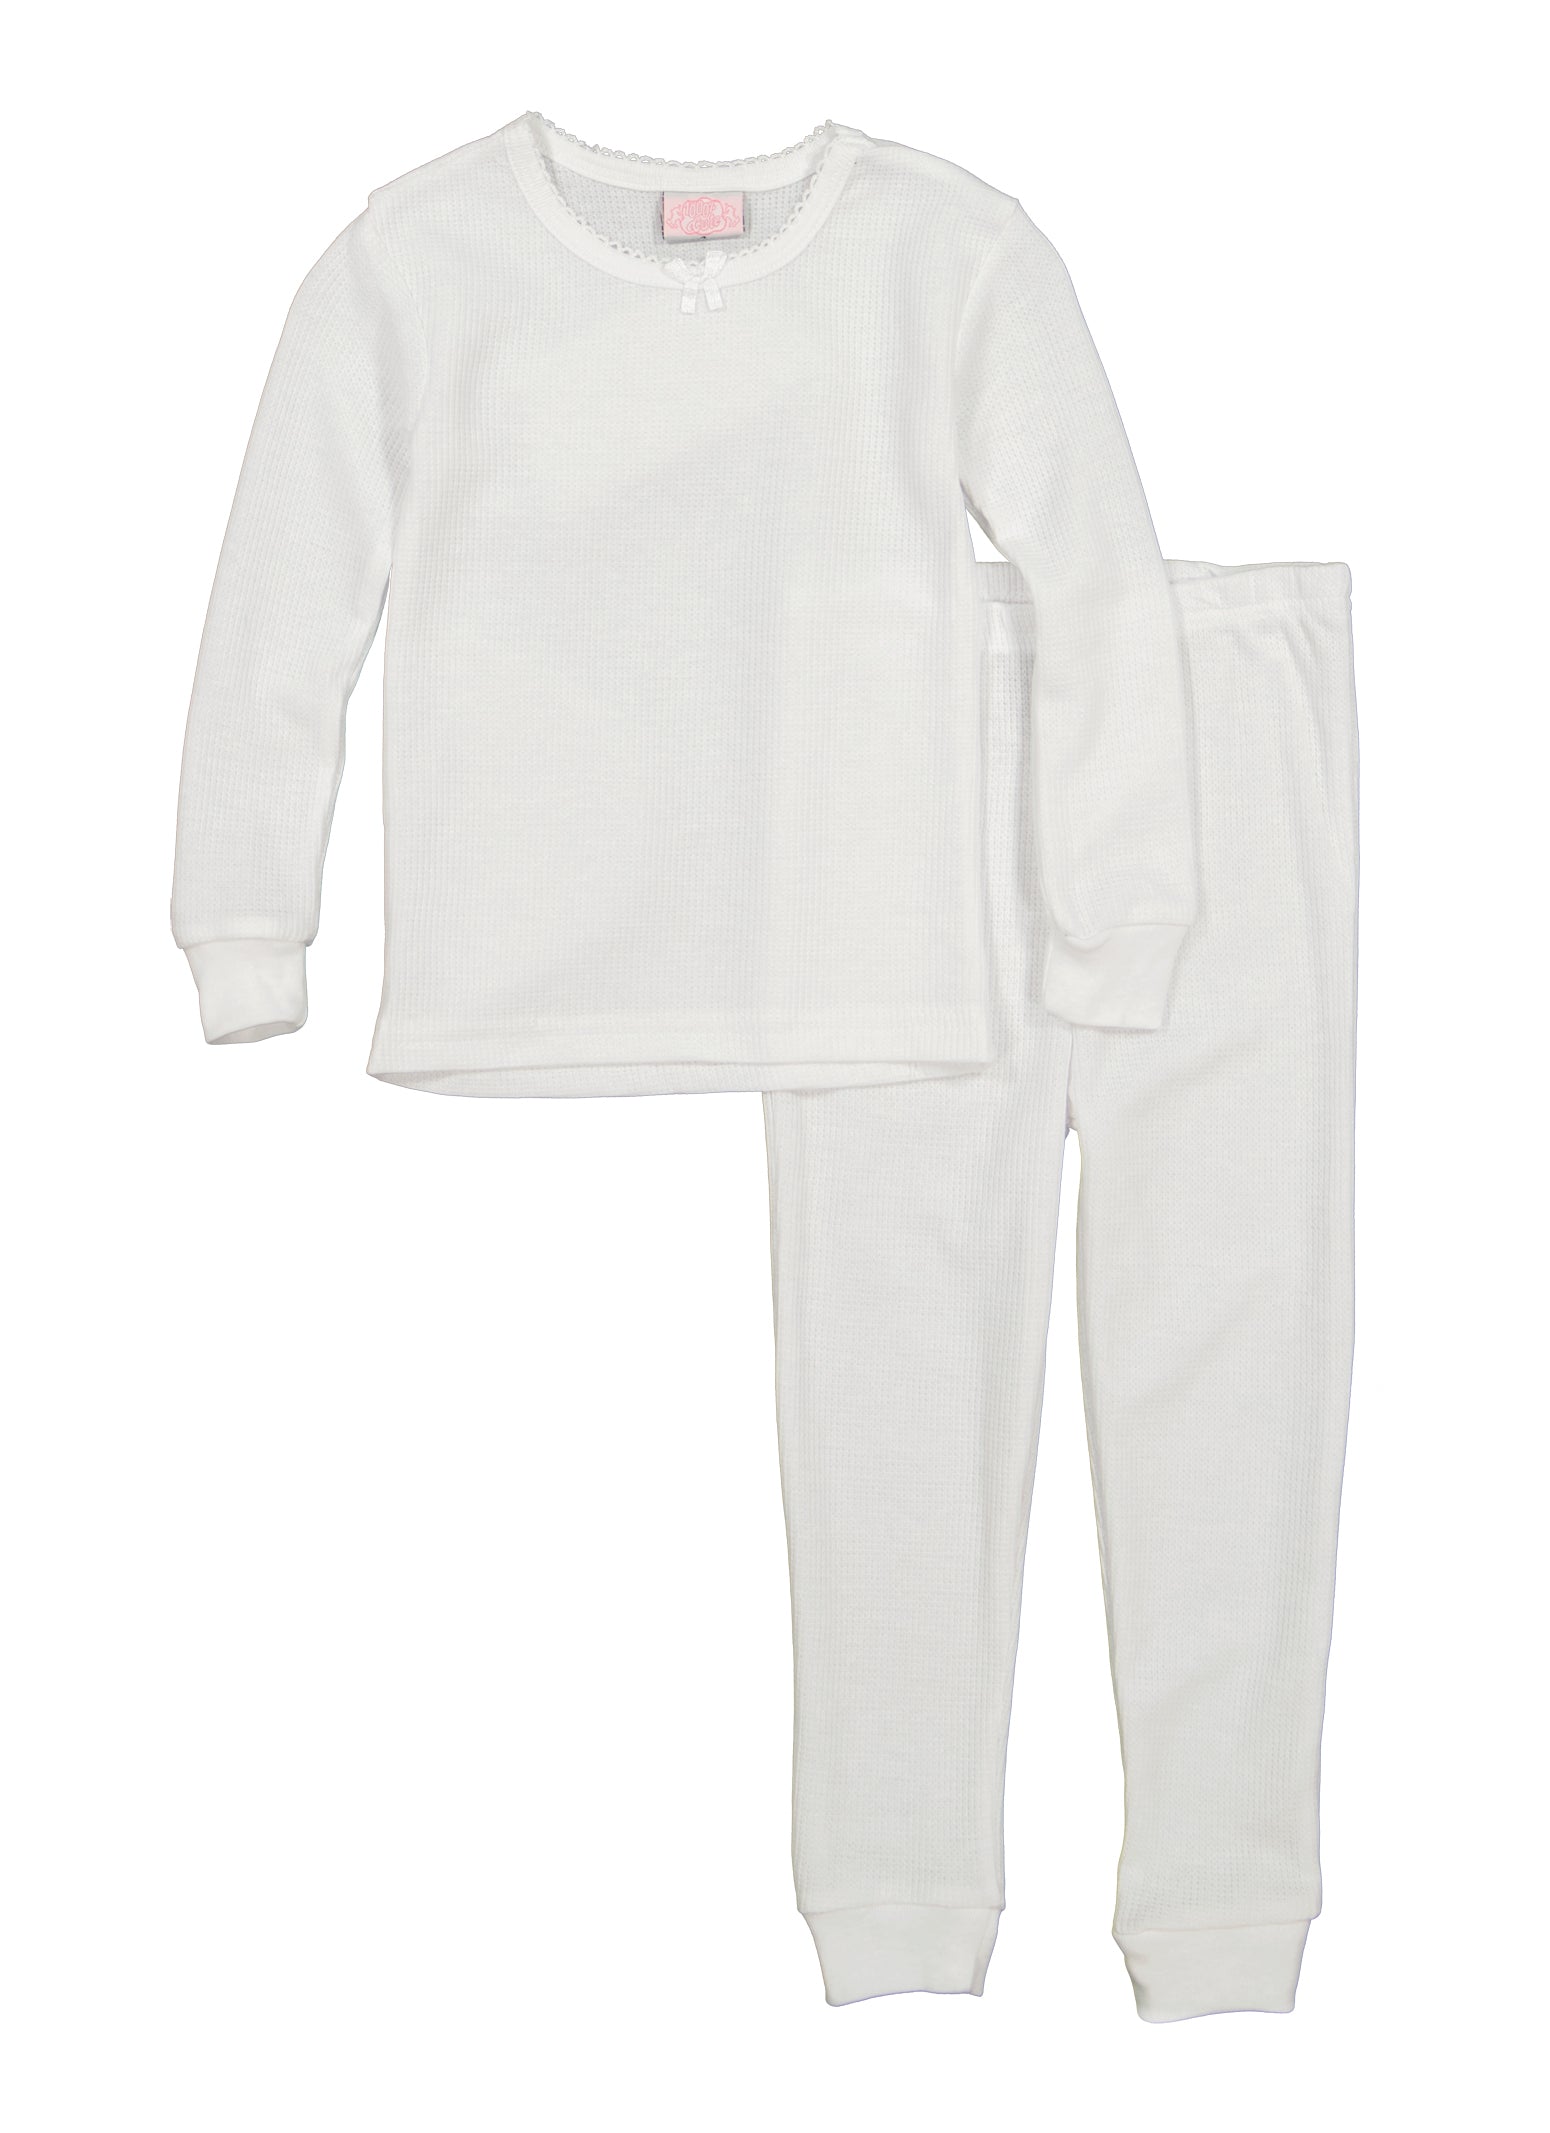 Rainbow Shops Womens Girls Thermal Pajama Top and Pants, White